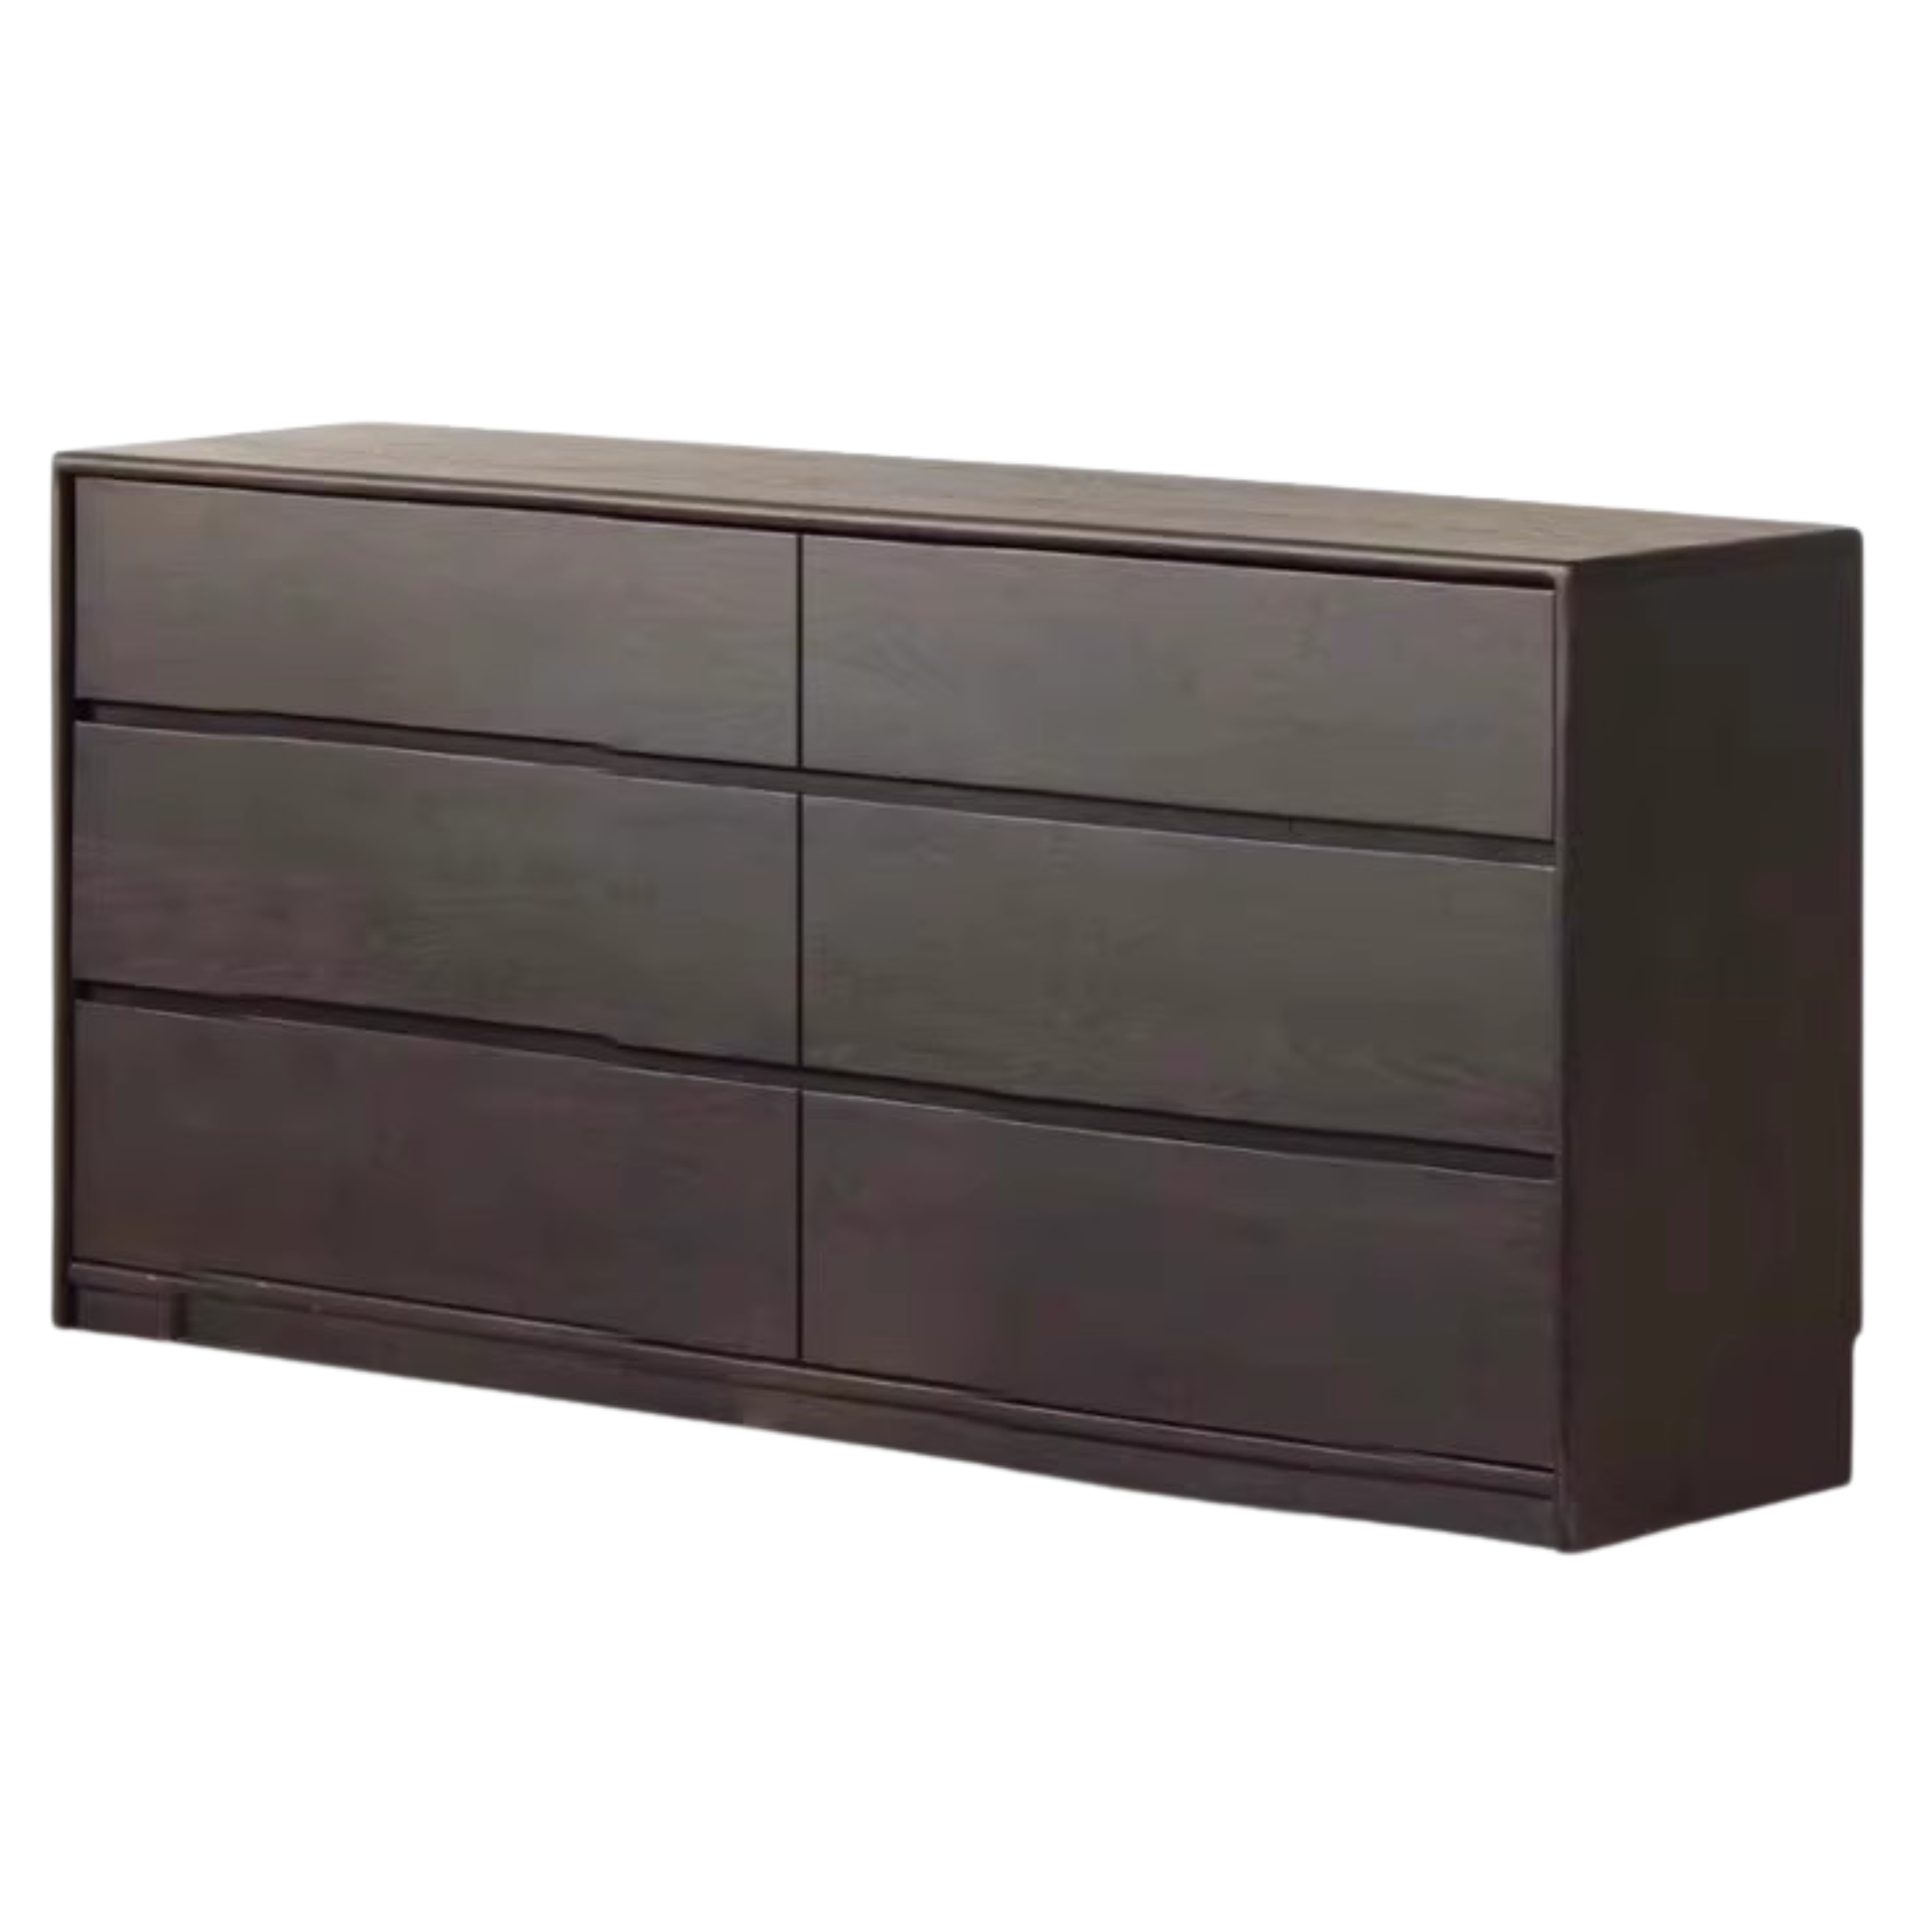 Oak solid wood Black chest of drawers